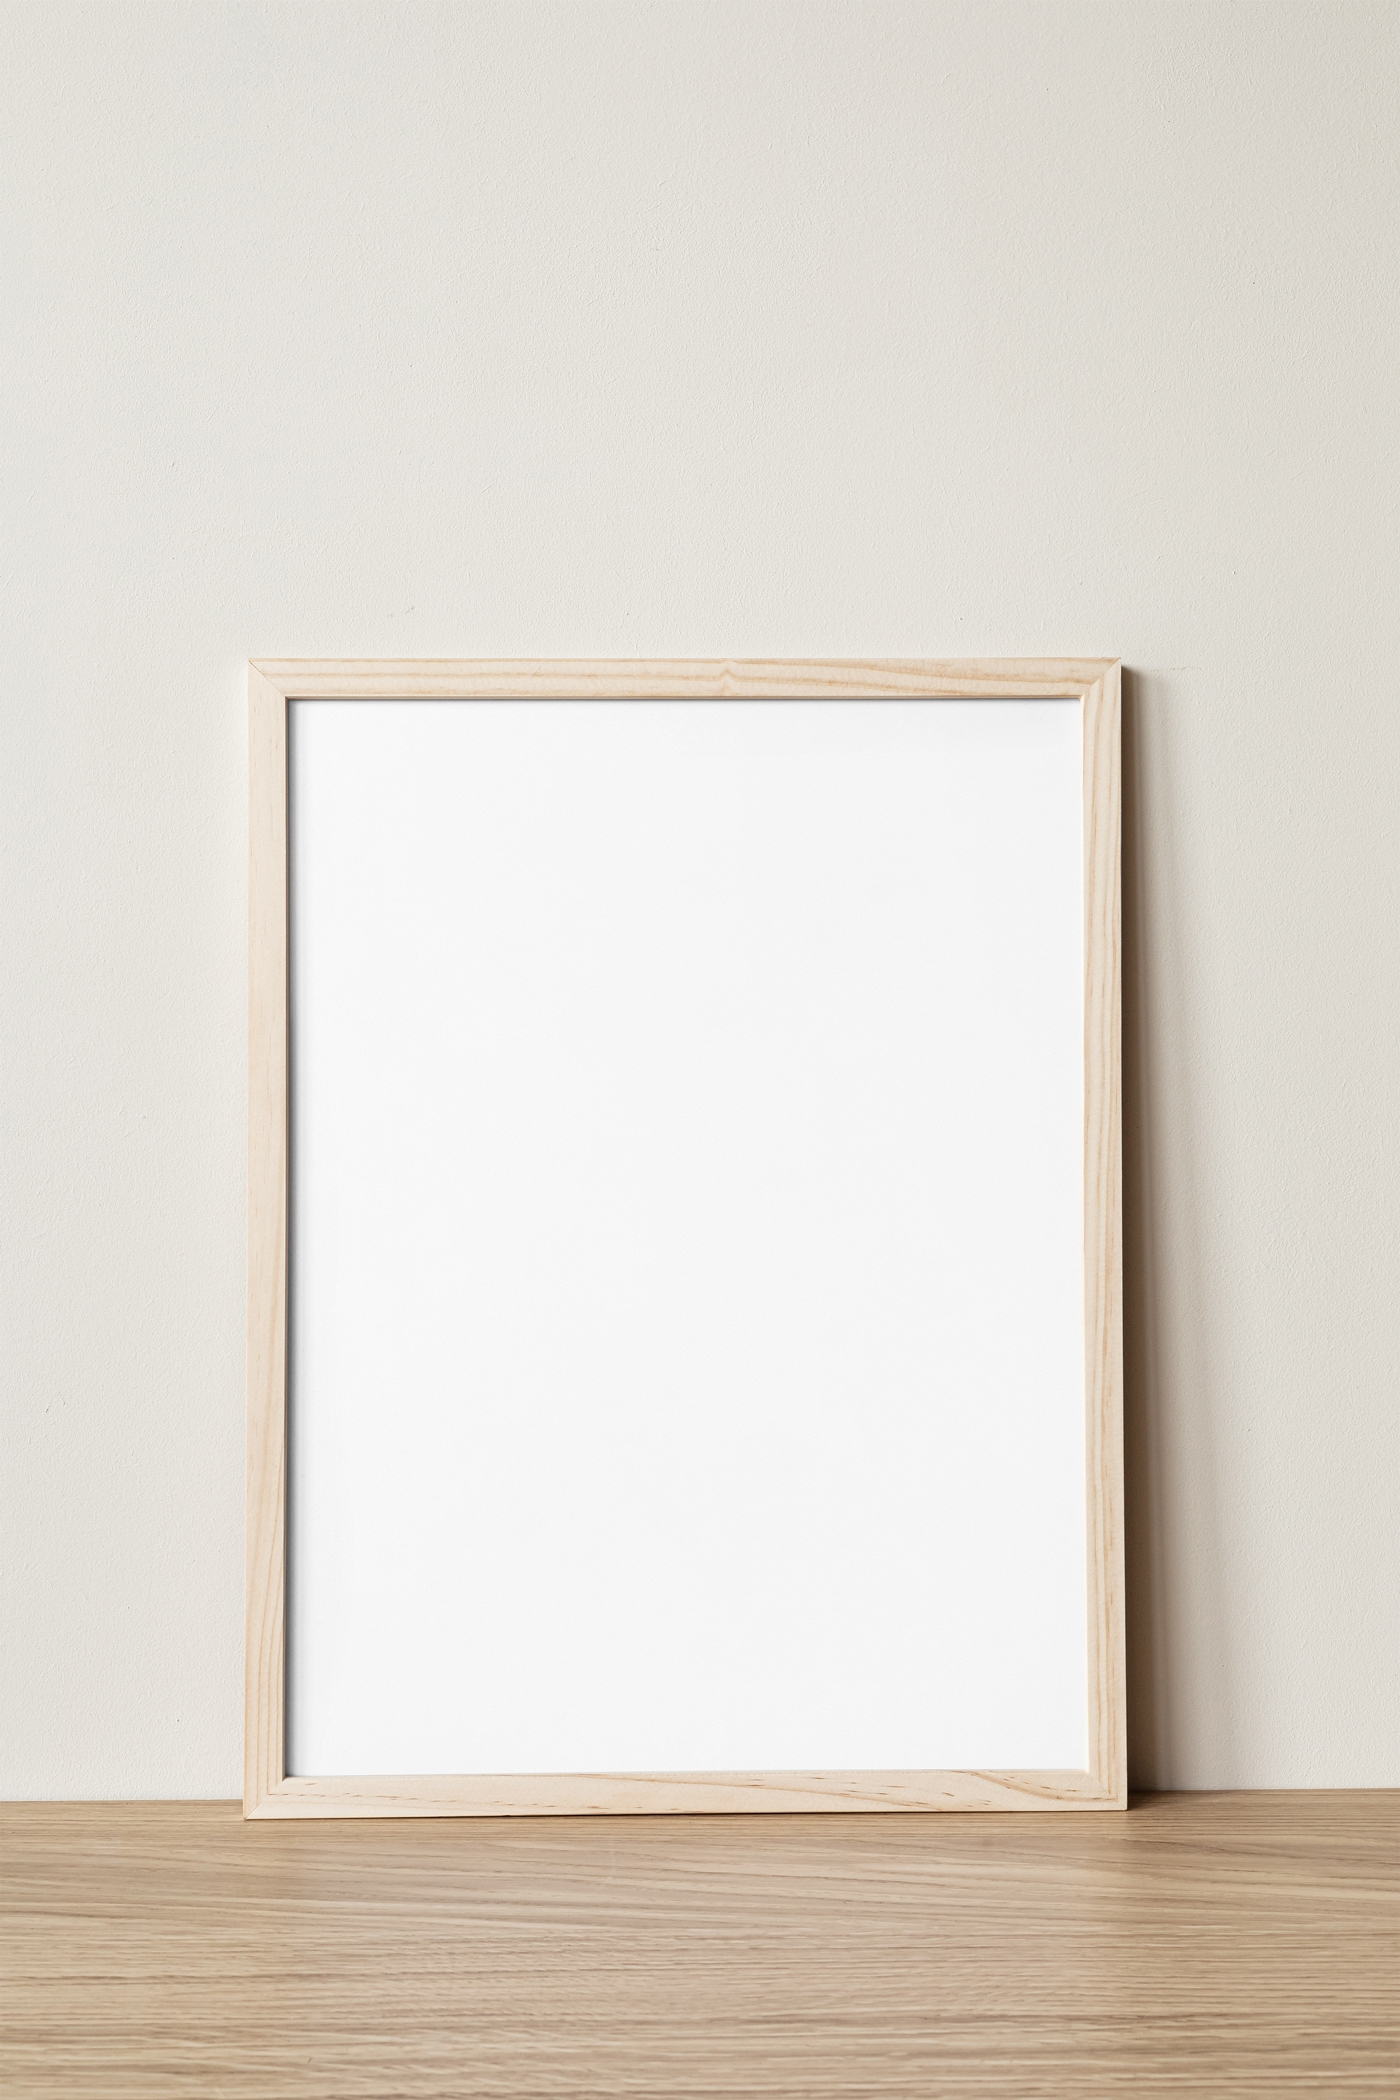 Front View of a Wooden Frame Mockup FREE PSD